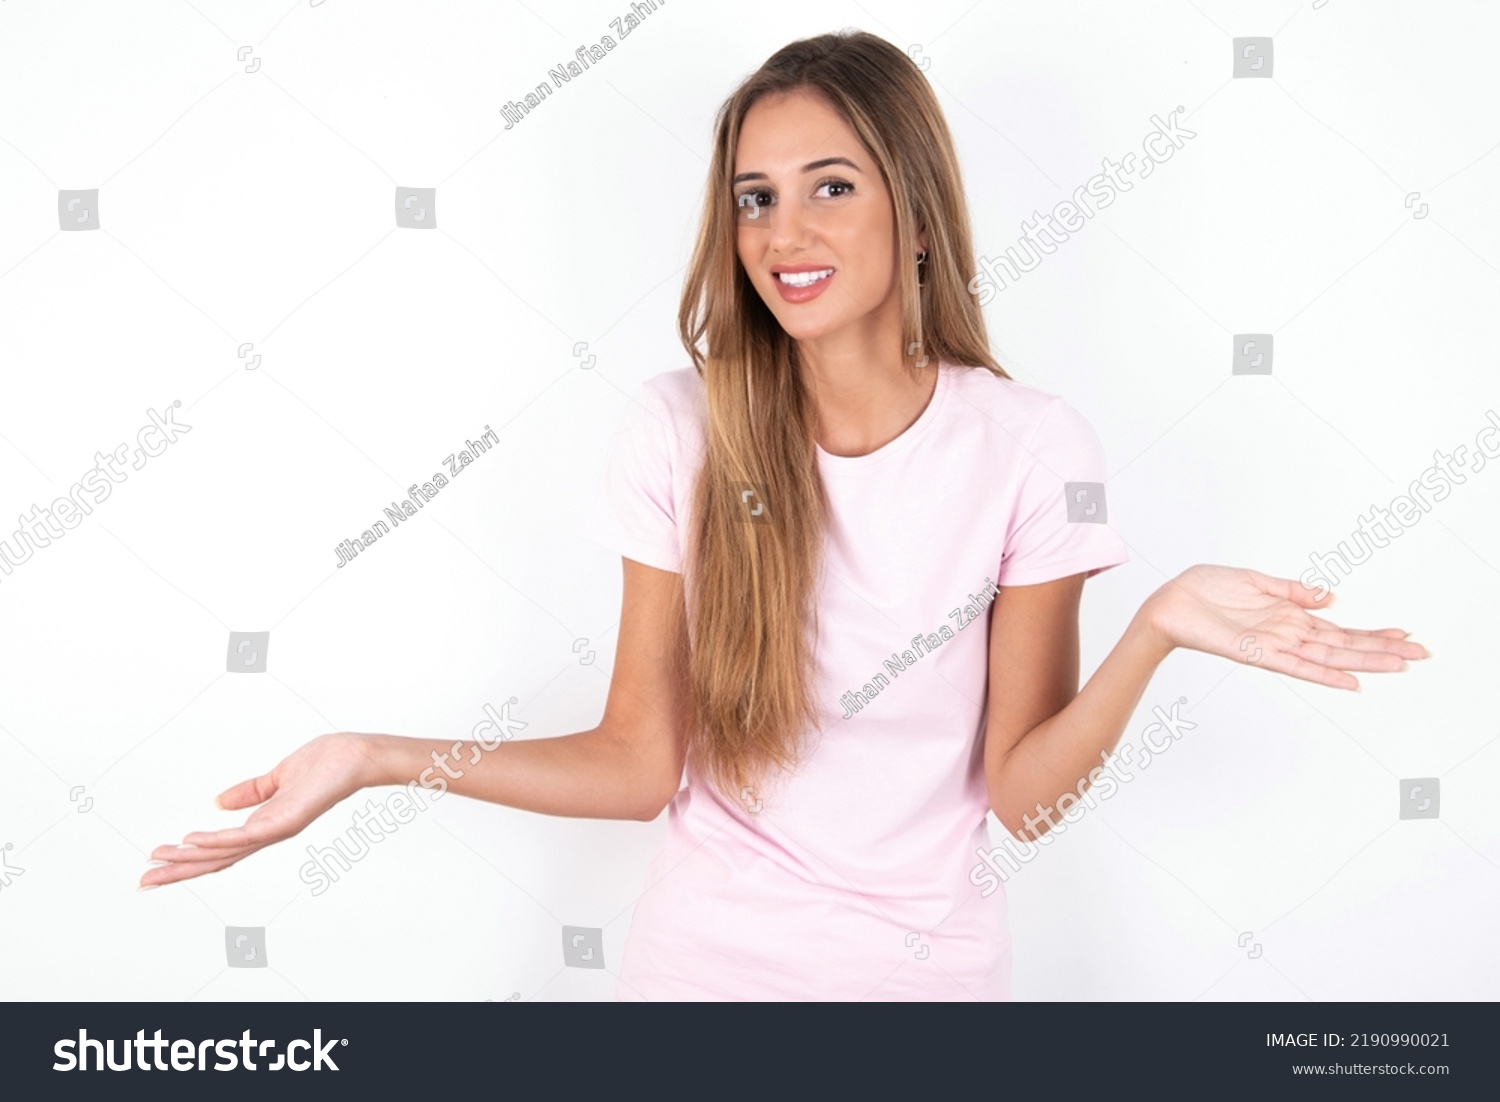 So what? Portrait of arrogant young beautiful woman wearing pink T-shirt over white background shrugging hands sideways smiling gasping indifferent, telling something obvious. #2190990021